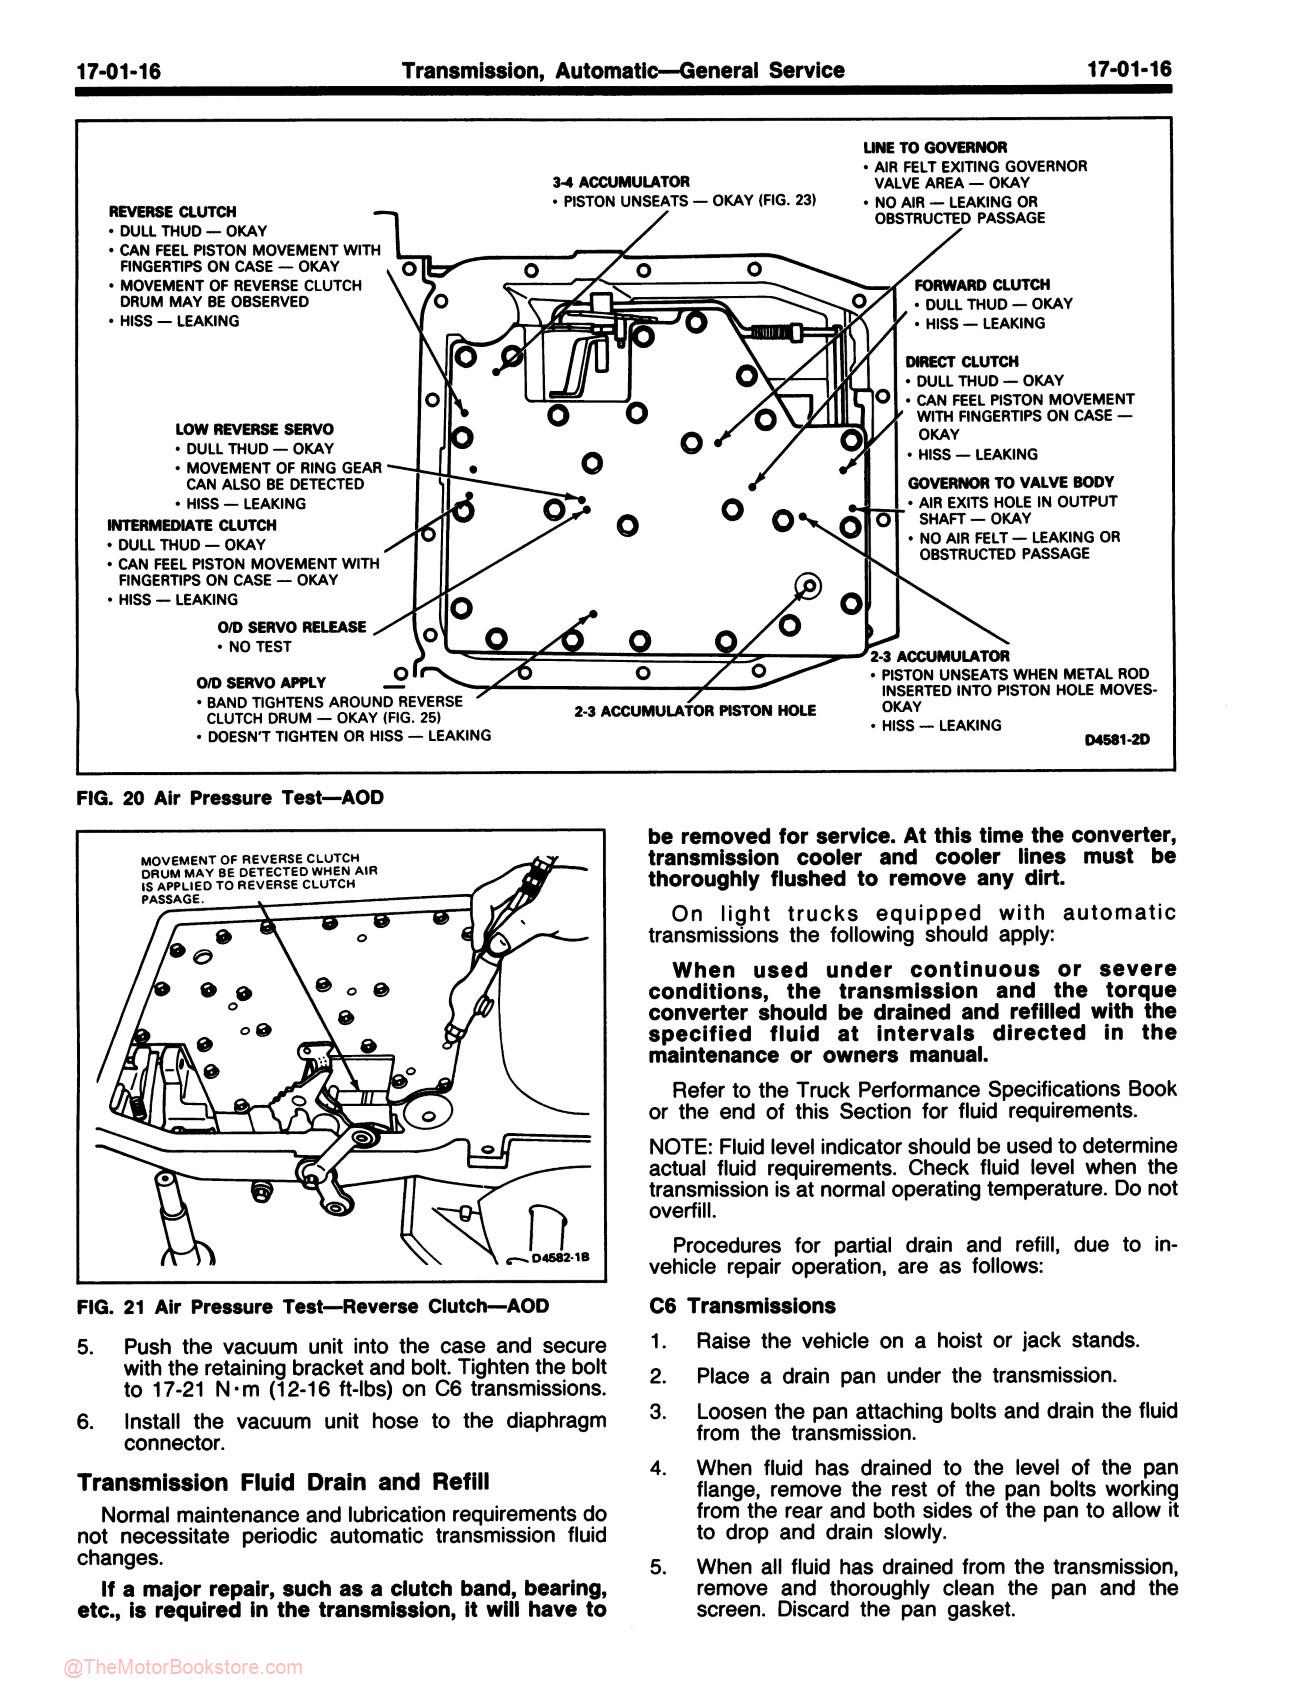 1990 Ford F-Series Truck & Bronco Electrical Vacuum Manual - Sample Page 2